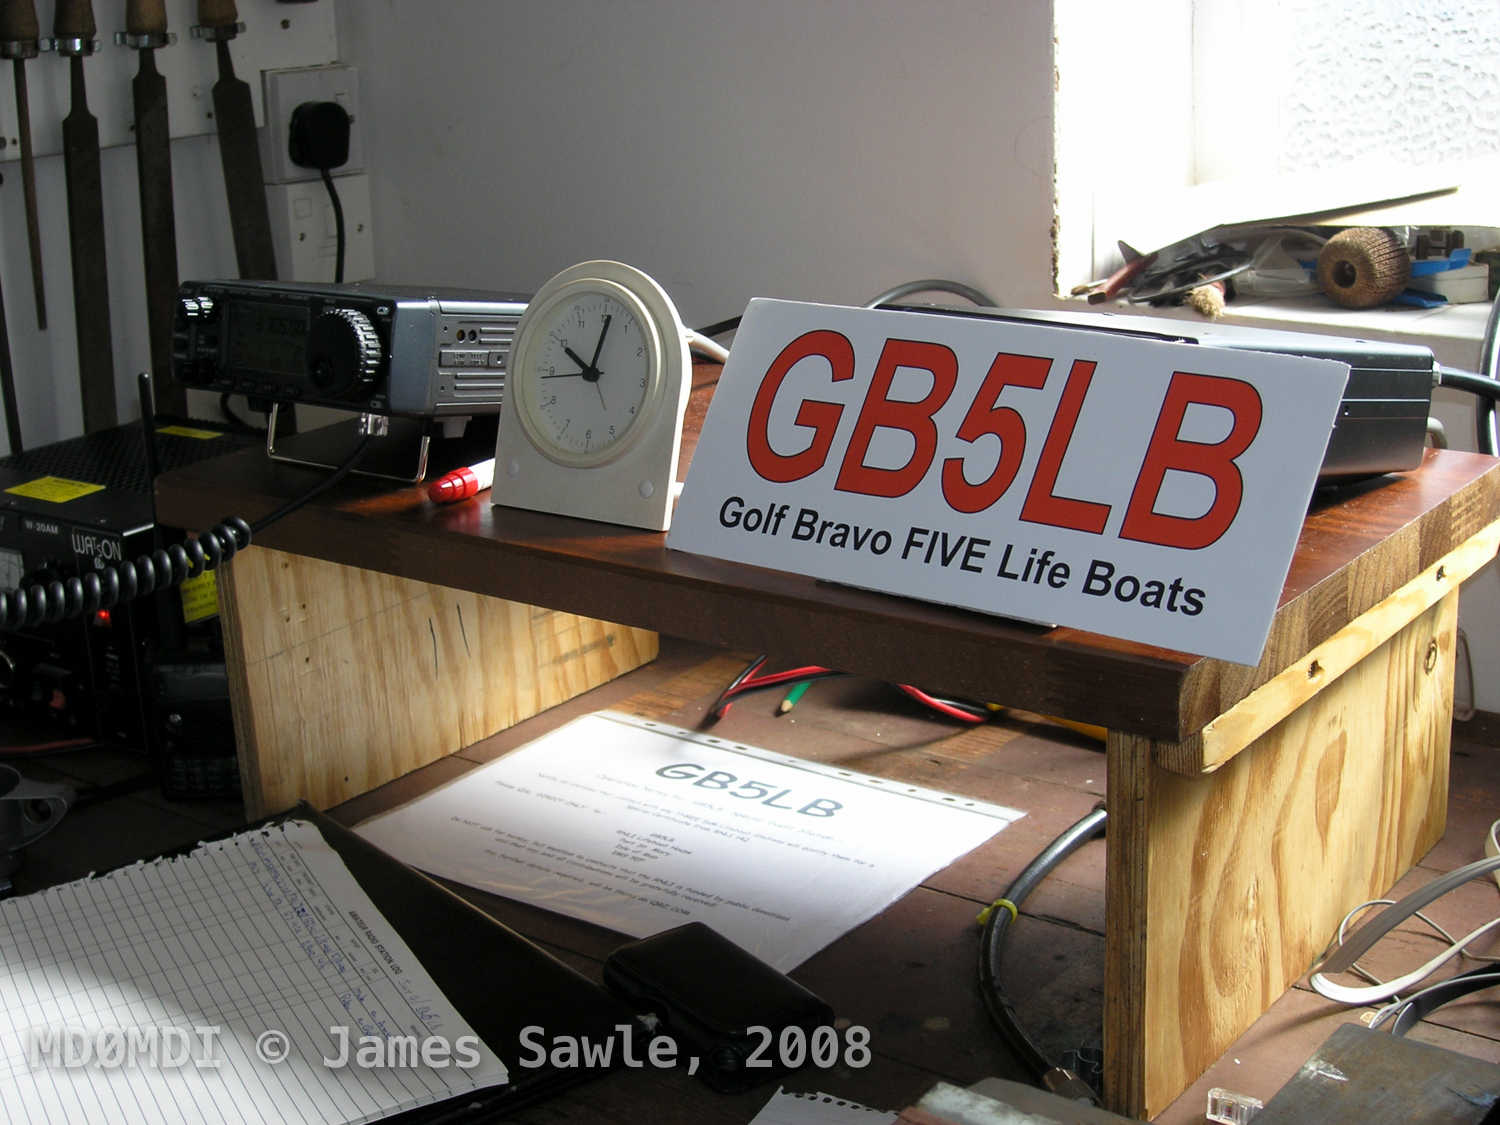 GB5LB Special Event Station in the Isle of Man